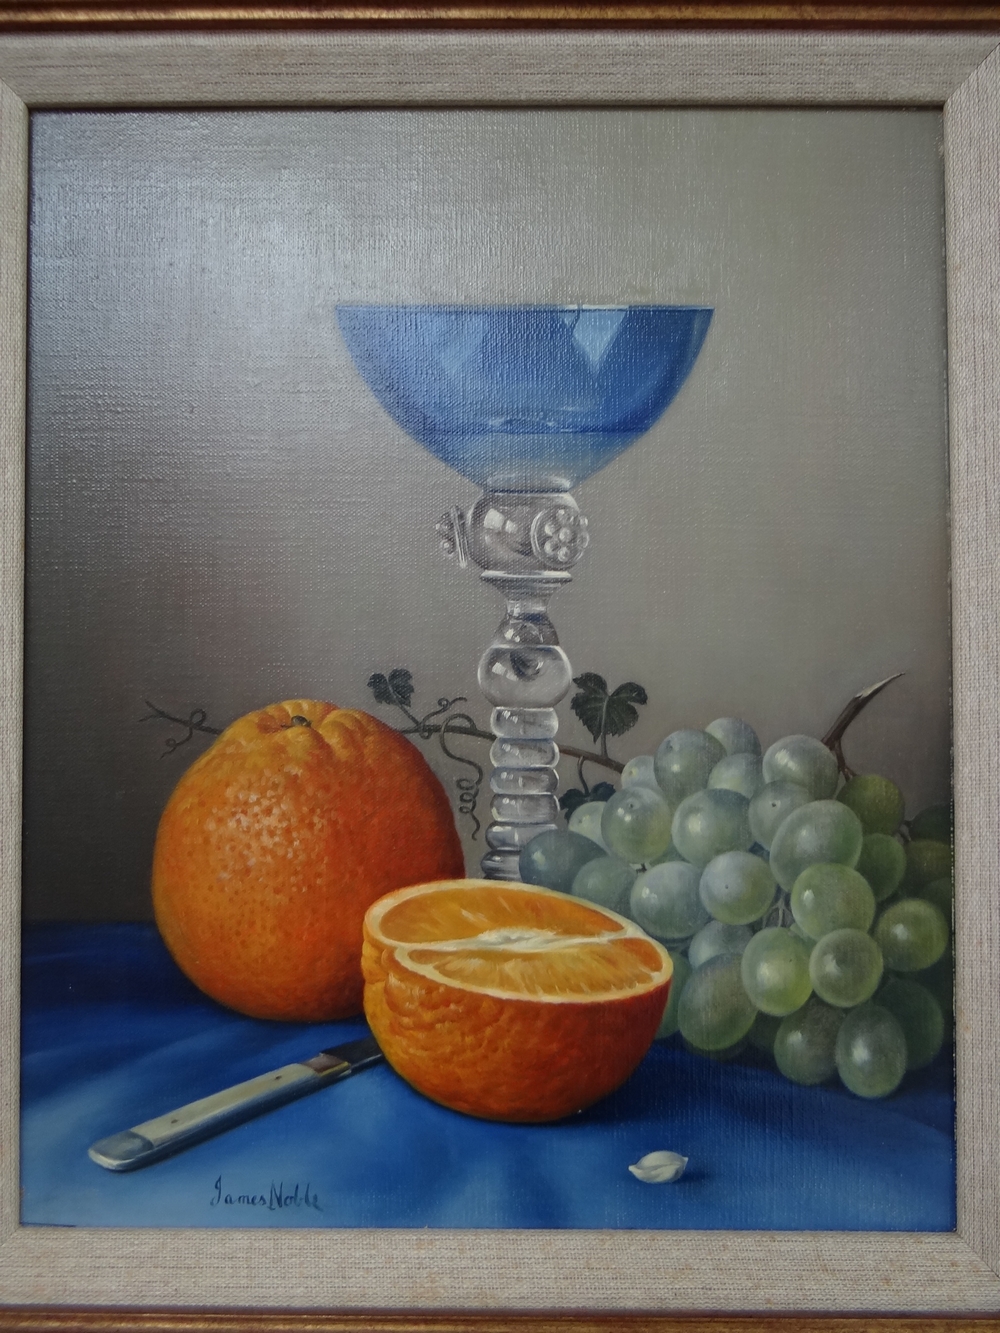 James Noble (1919 - 1989) British, Orange and blue, Oil on canvas, Signed, 12 x 10 ins.